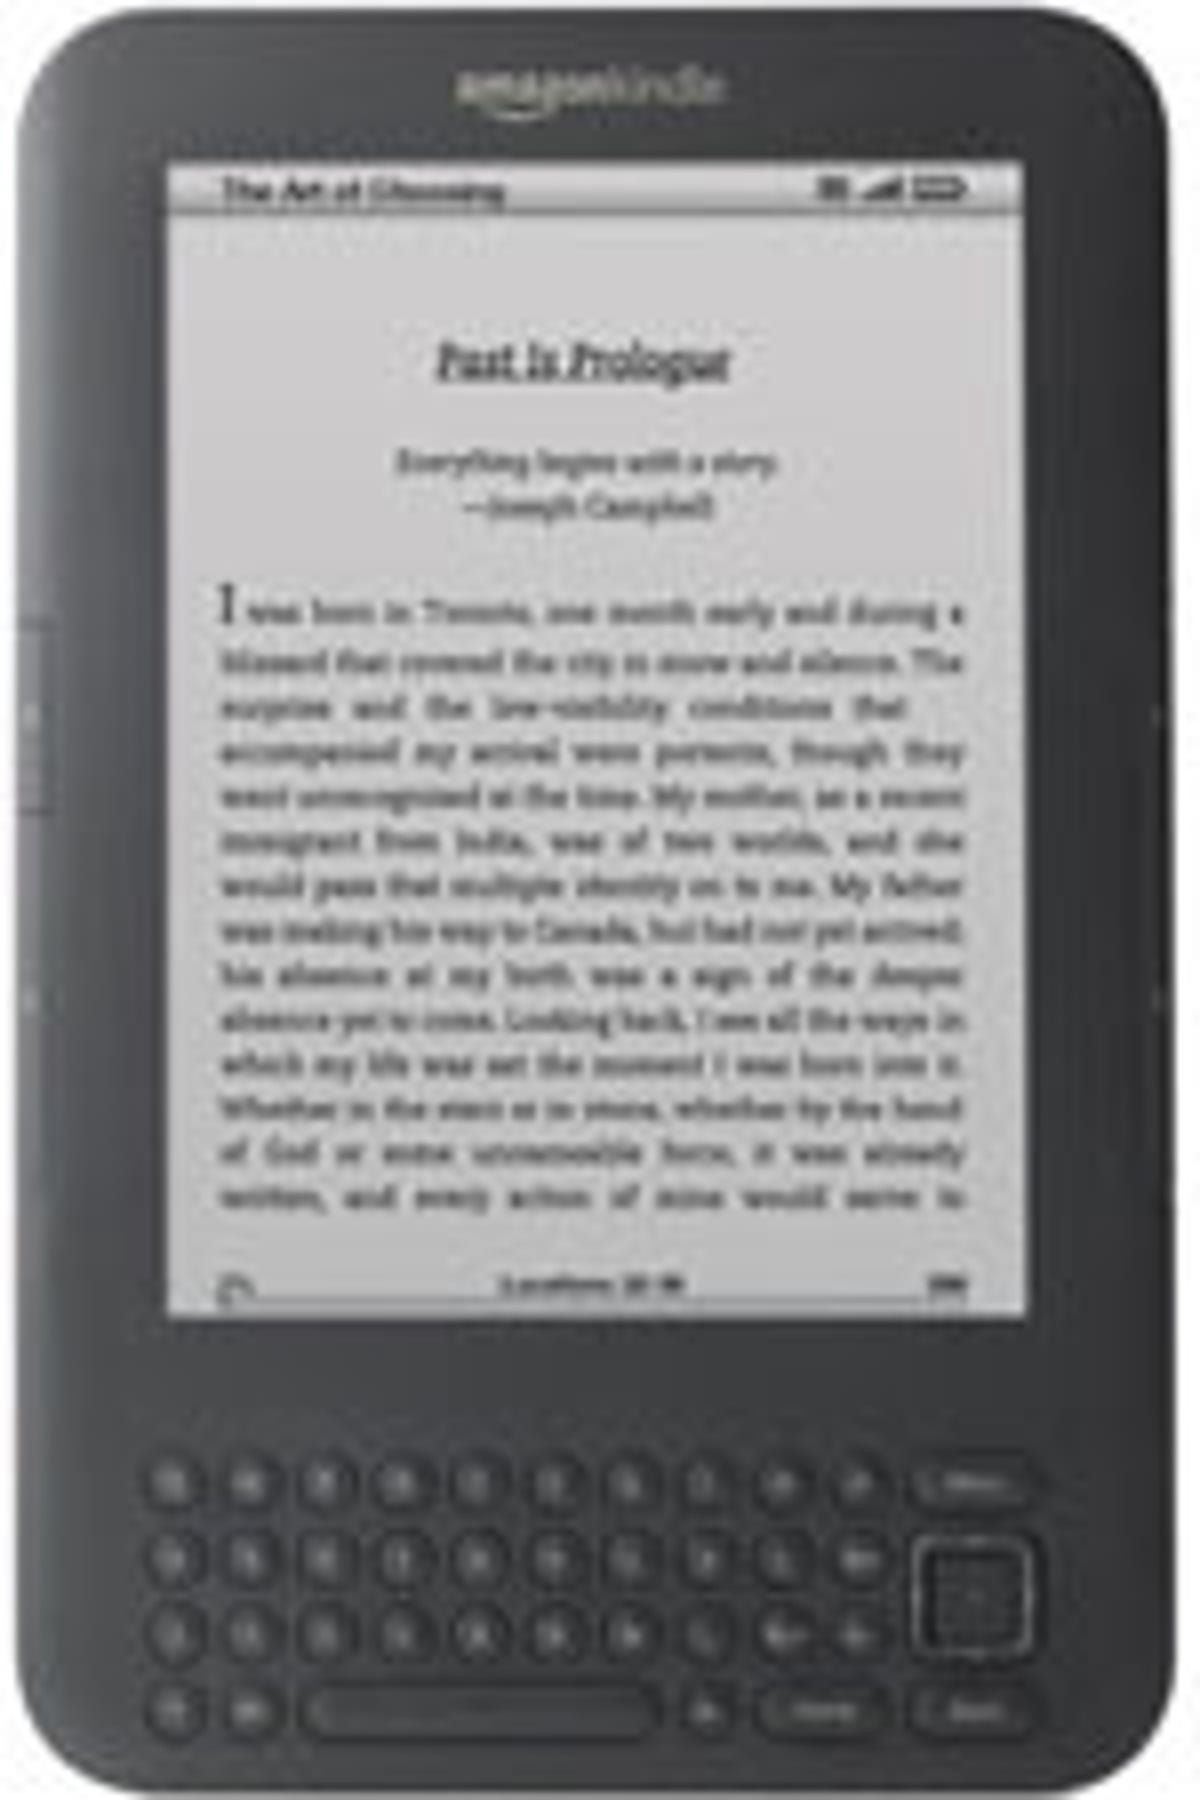 Is Amazon looking to expand beyond the Kindle?